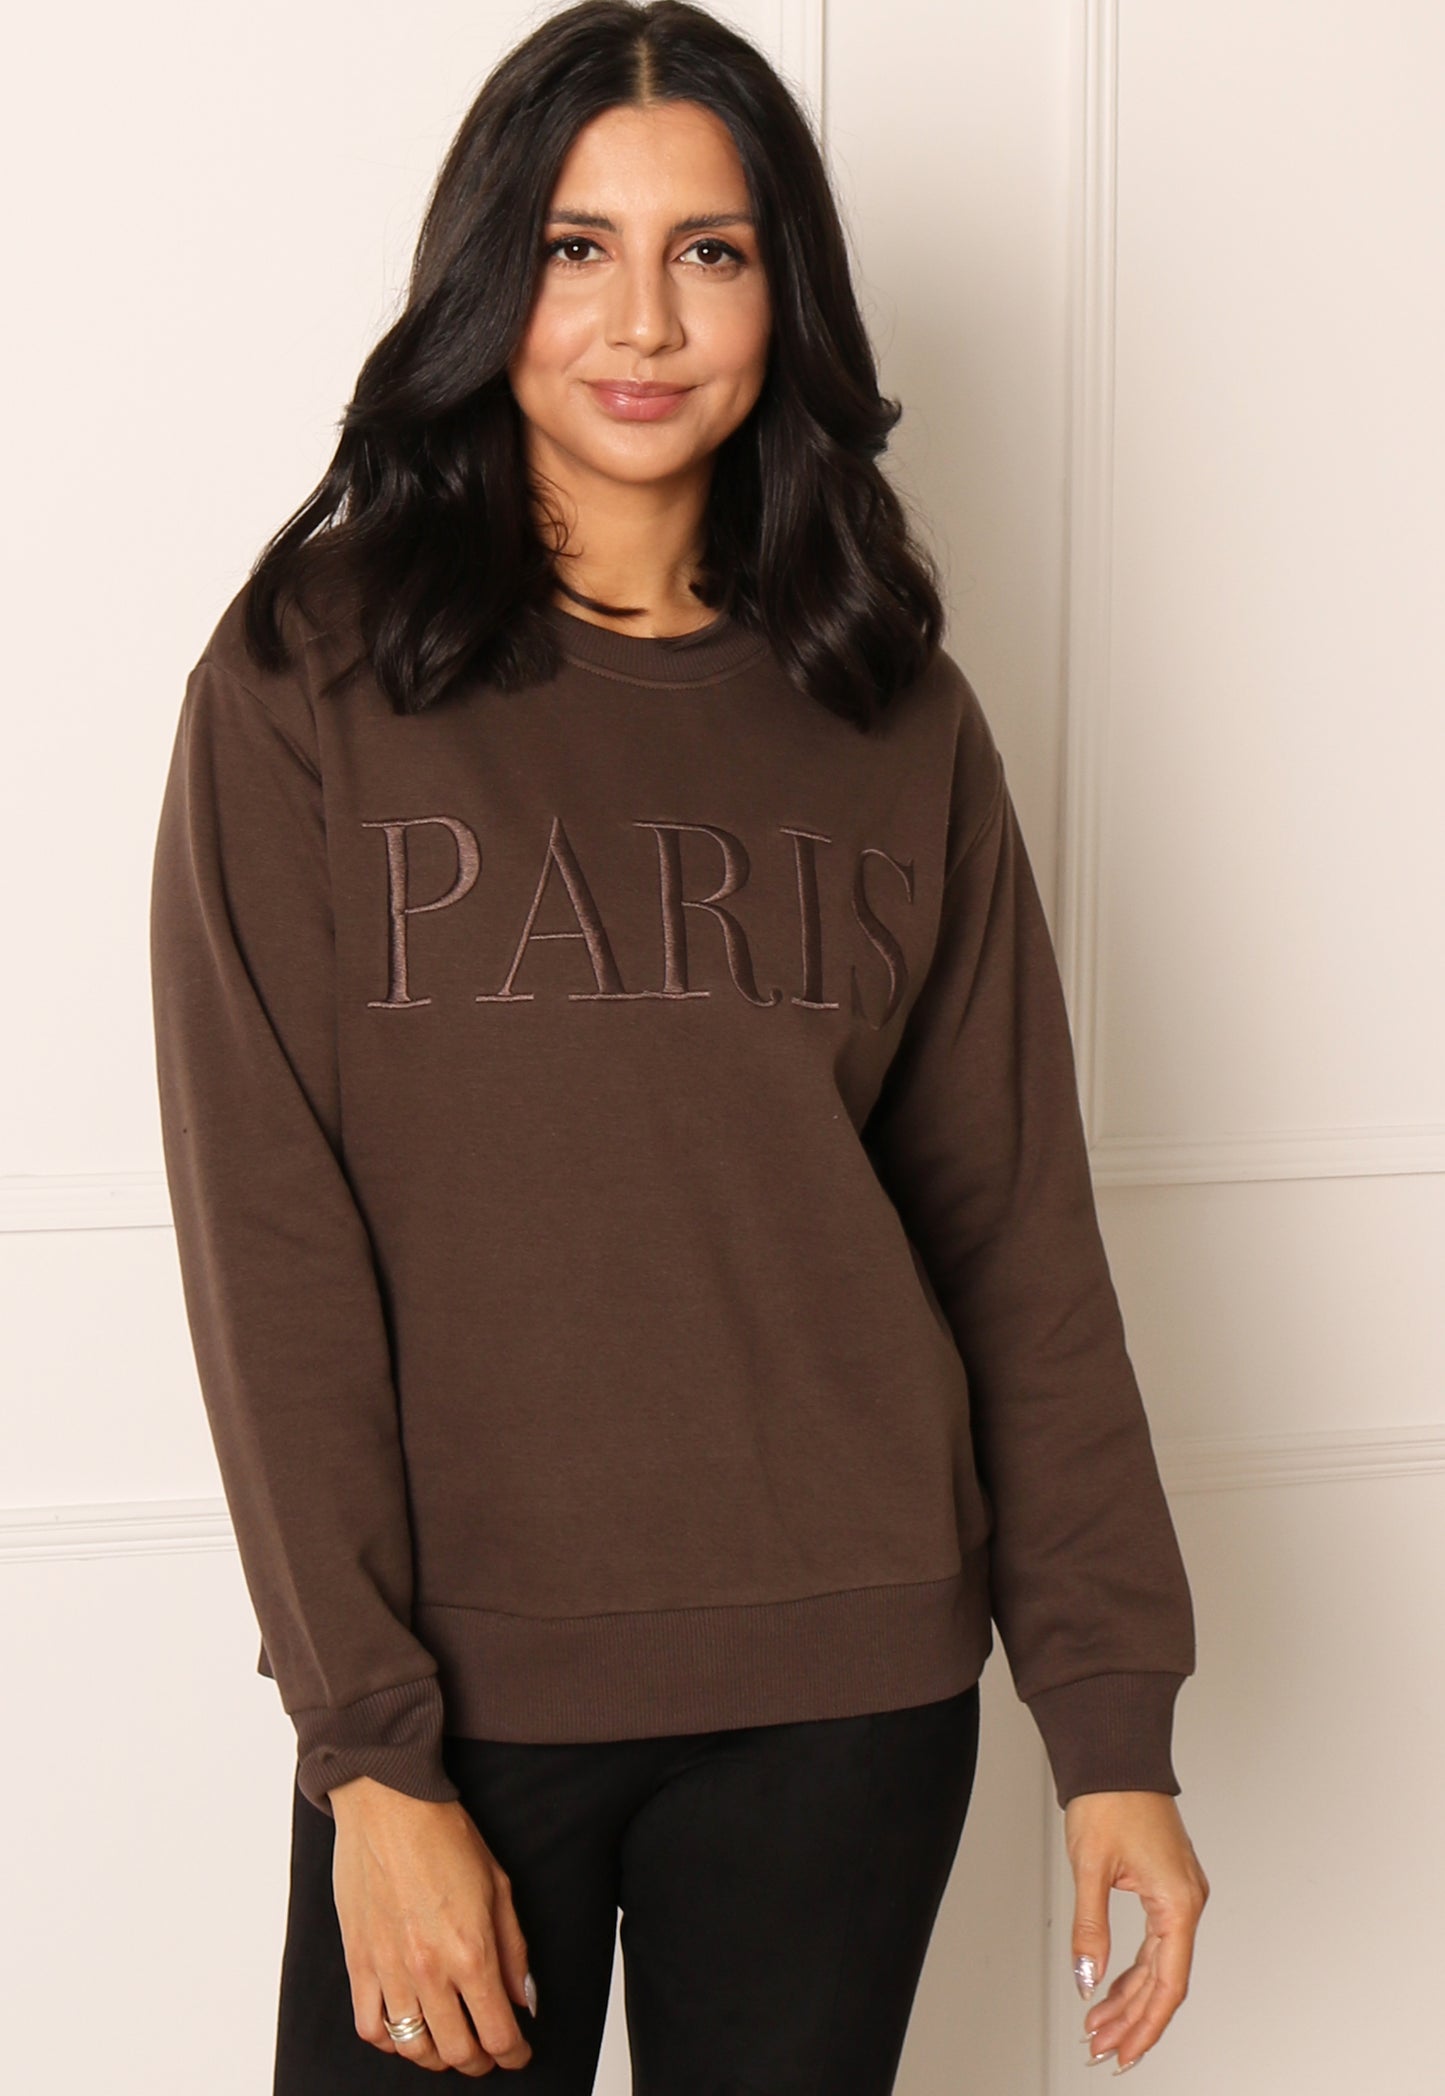 ONLY Paris Embroidered Slogan Sweatshirt in Chocolate Brown - One Nation Clothing